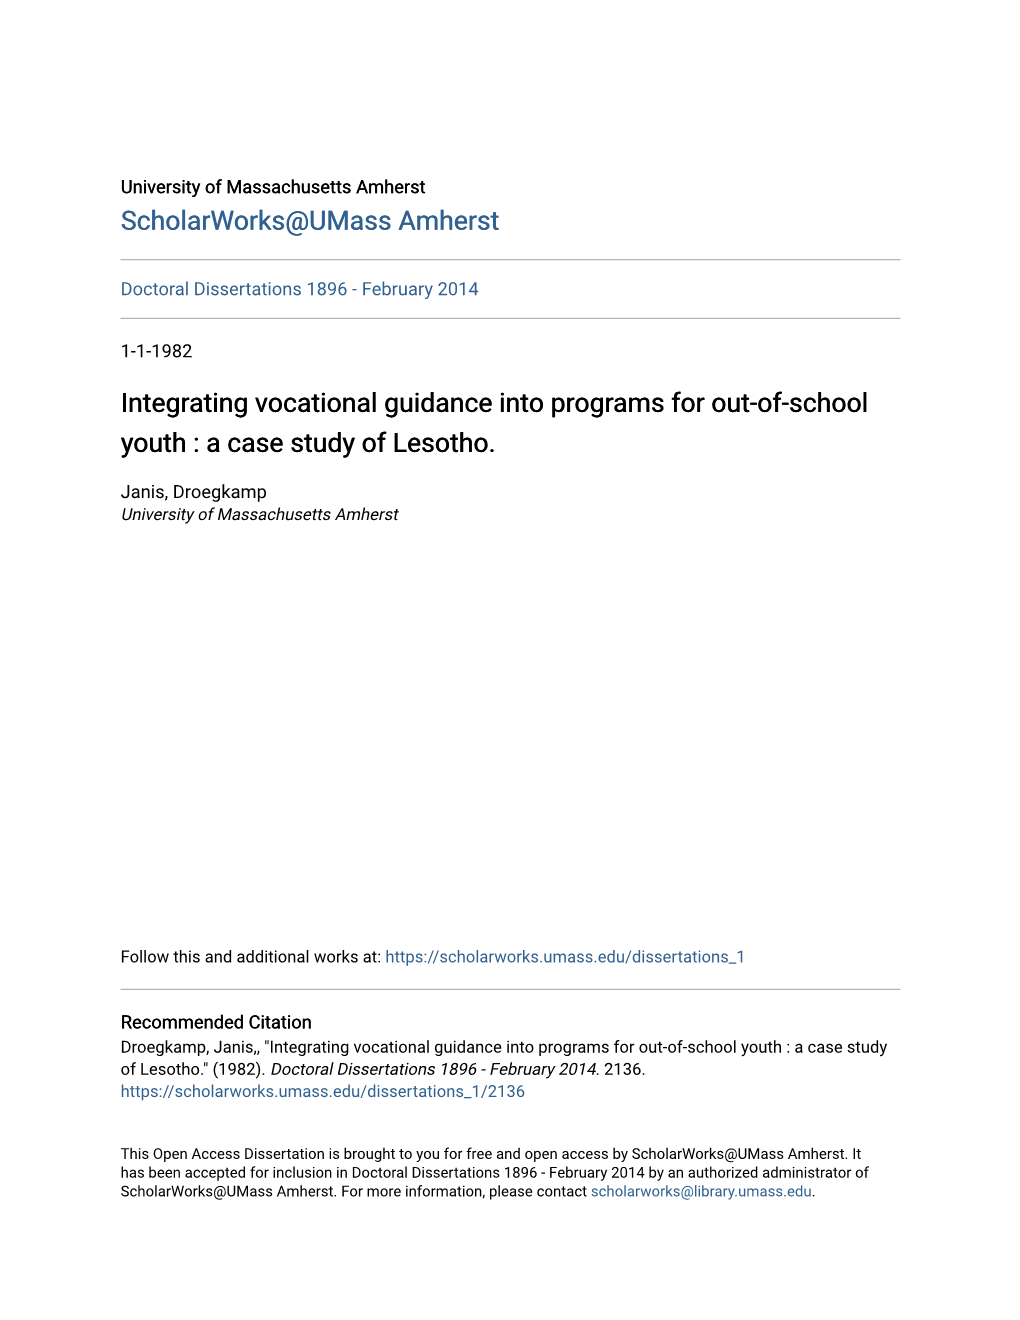 Integrating Vocational Guidance Into Programs for Out-Of-School Youth : a Case Study of Lesotho